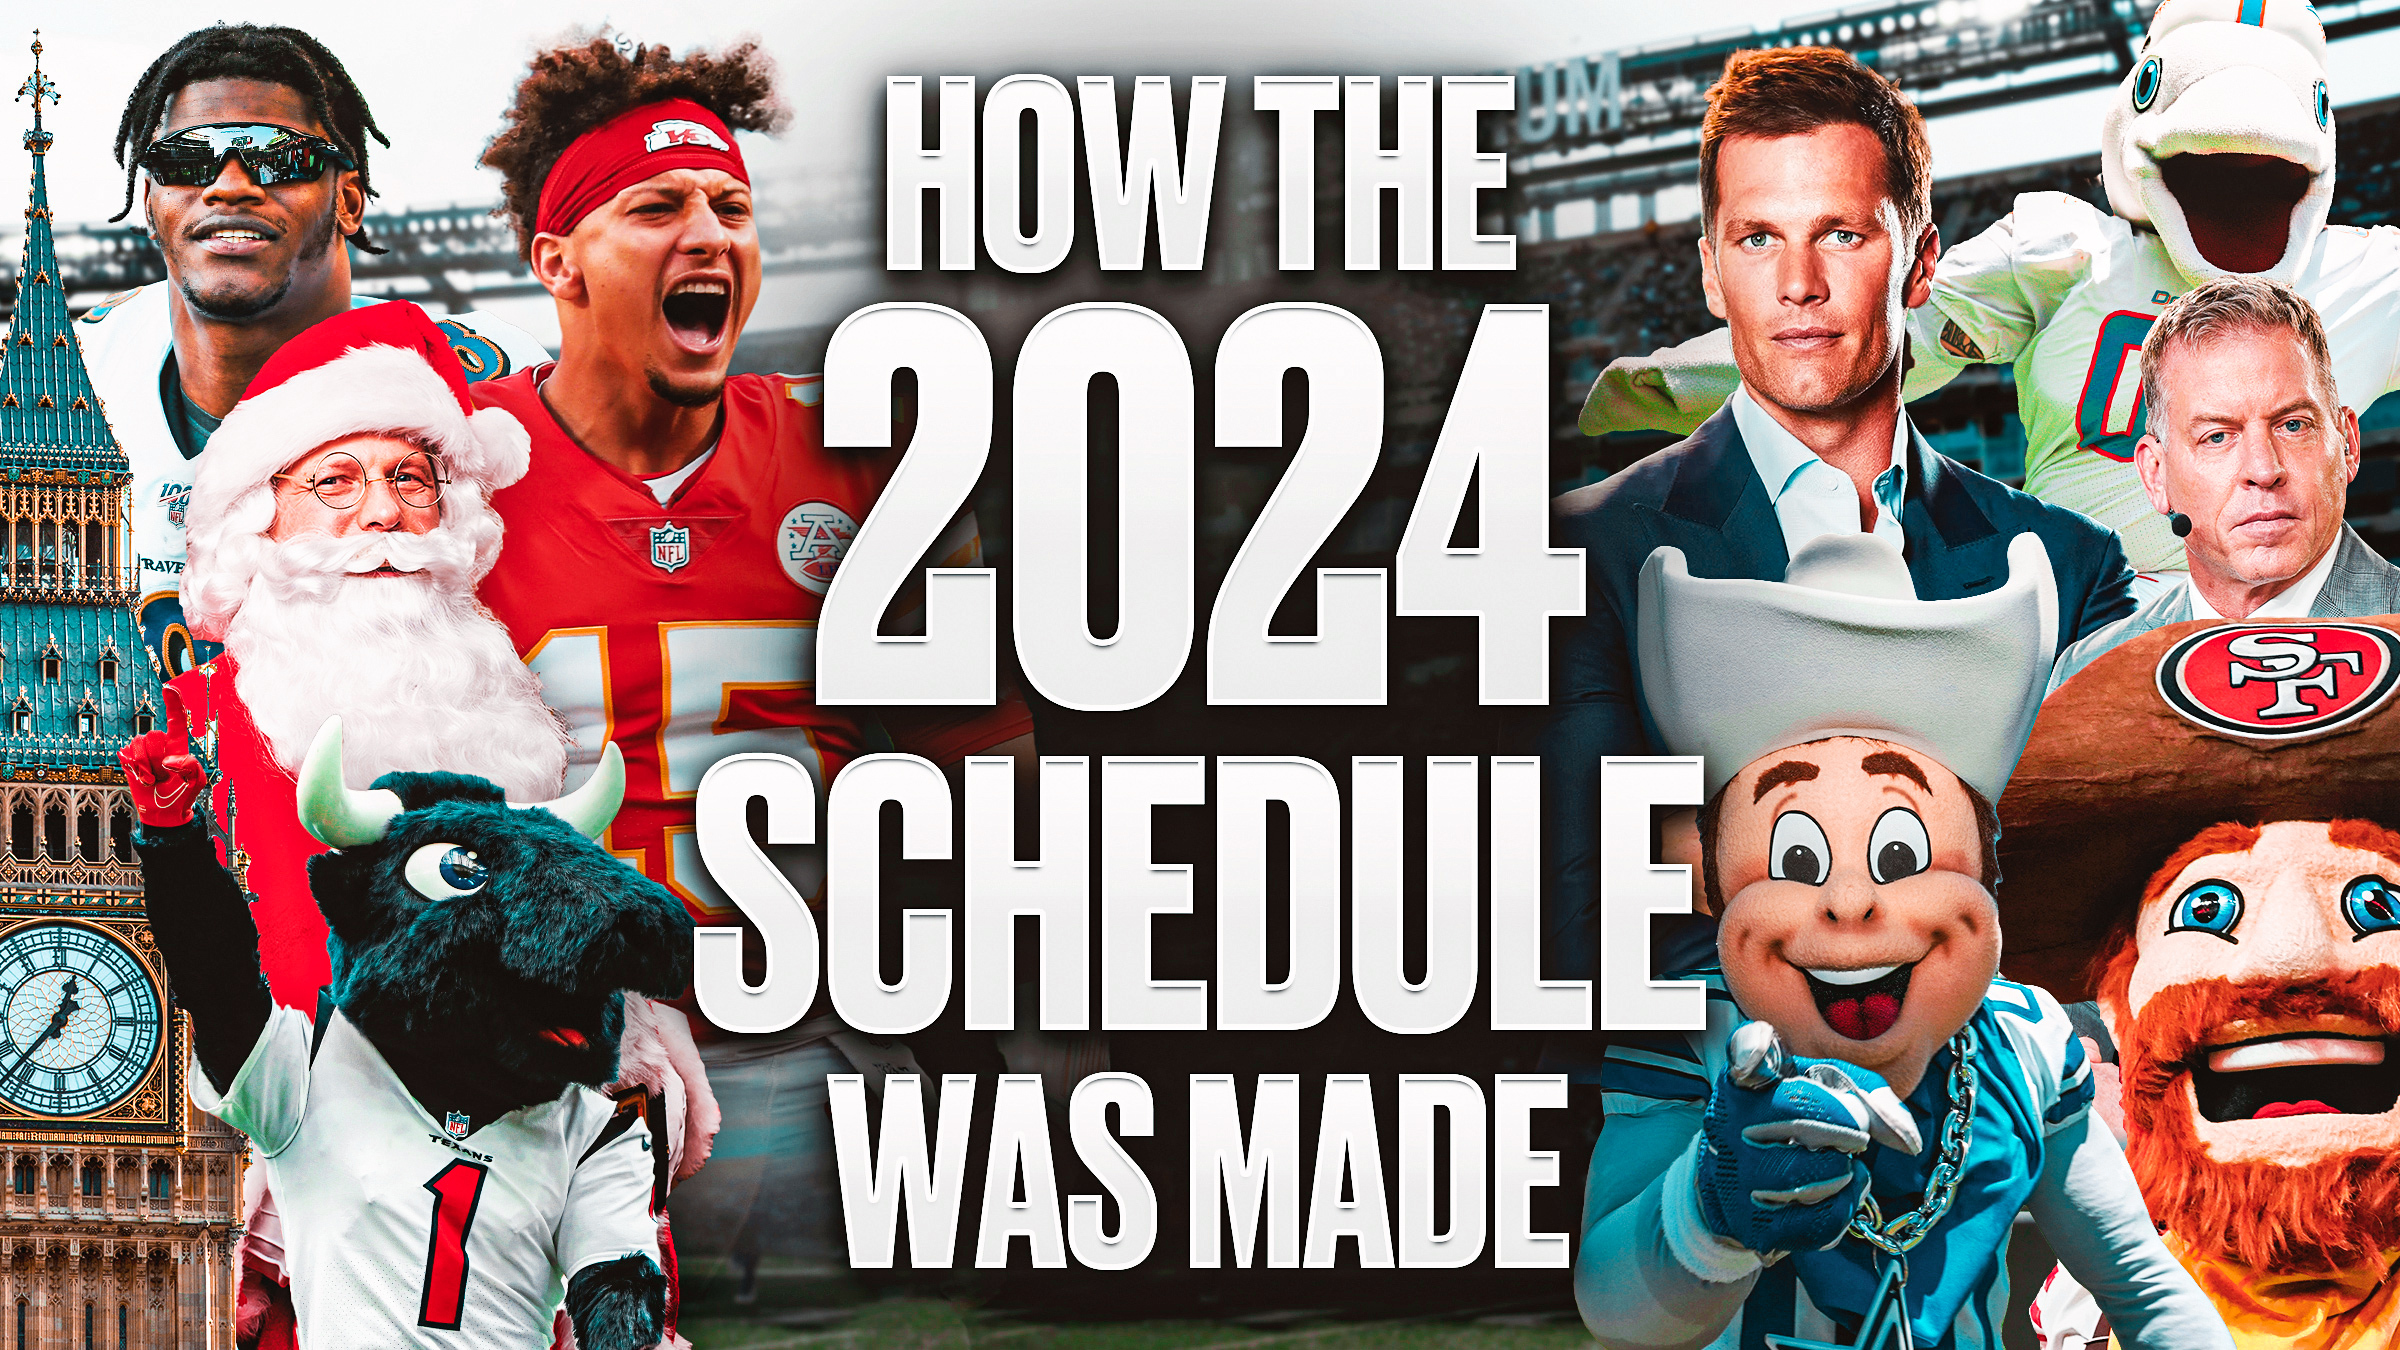 Specialty image "How the 2024 Schedule was made"